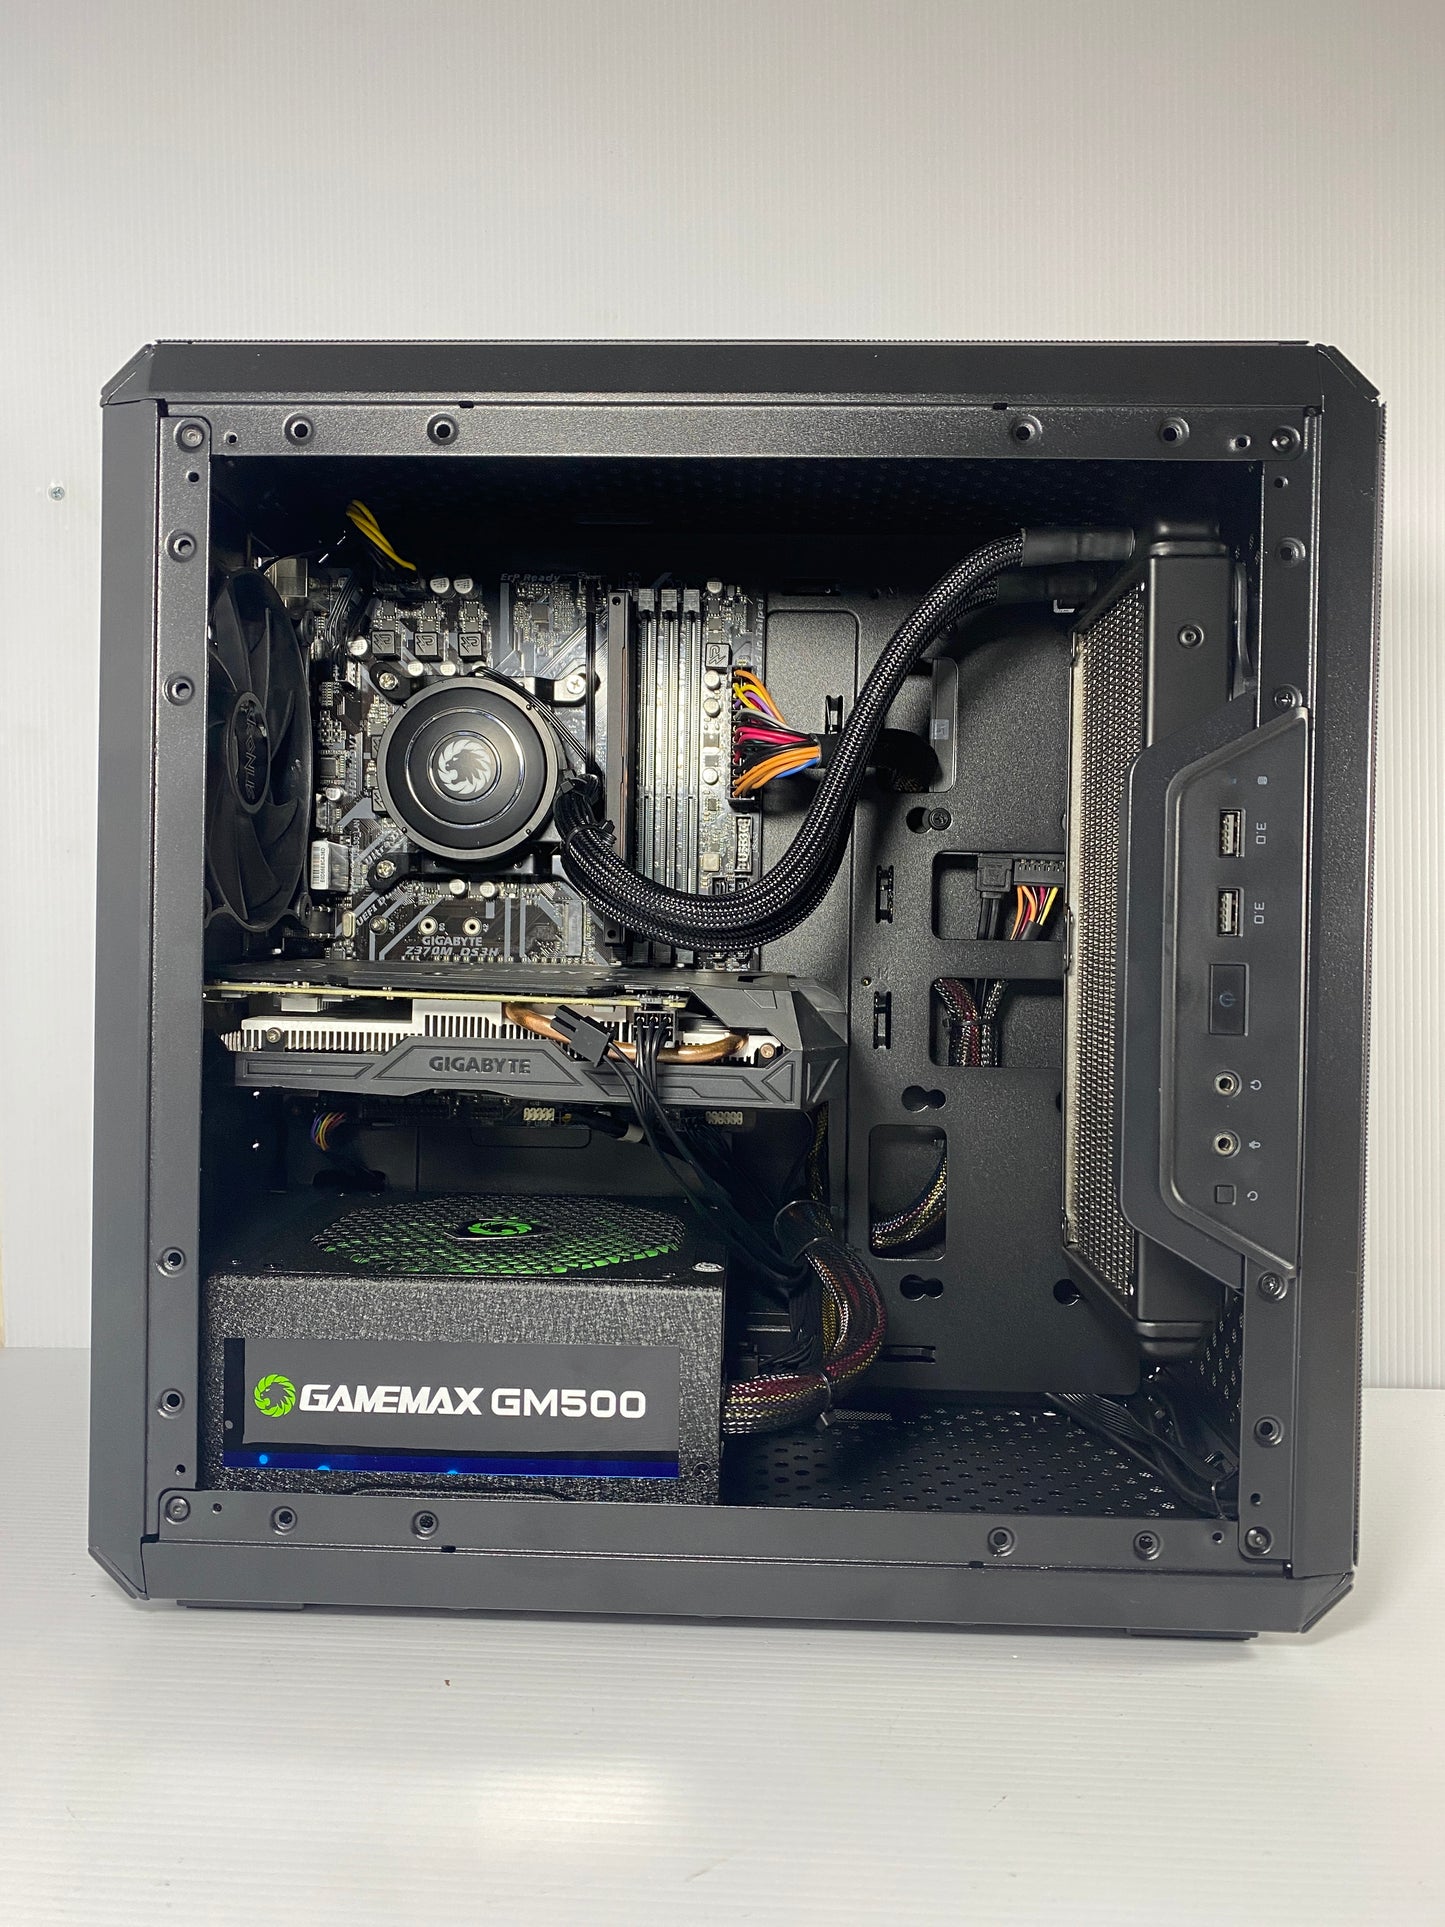 Cooler Master Compact Gaming PC